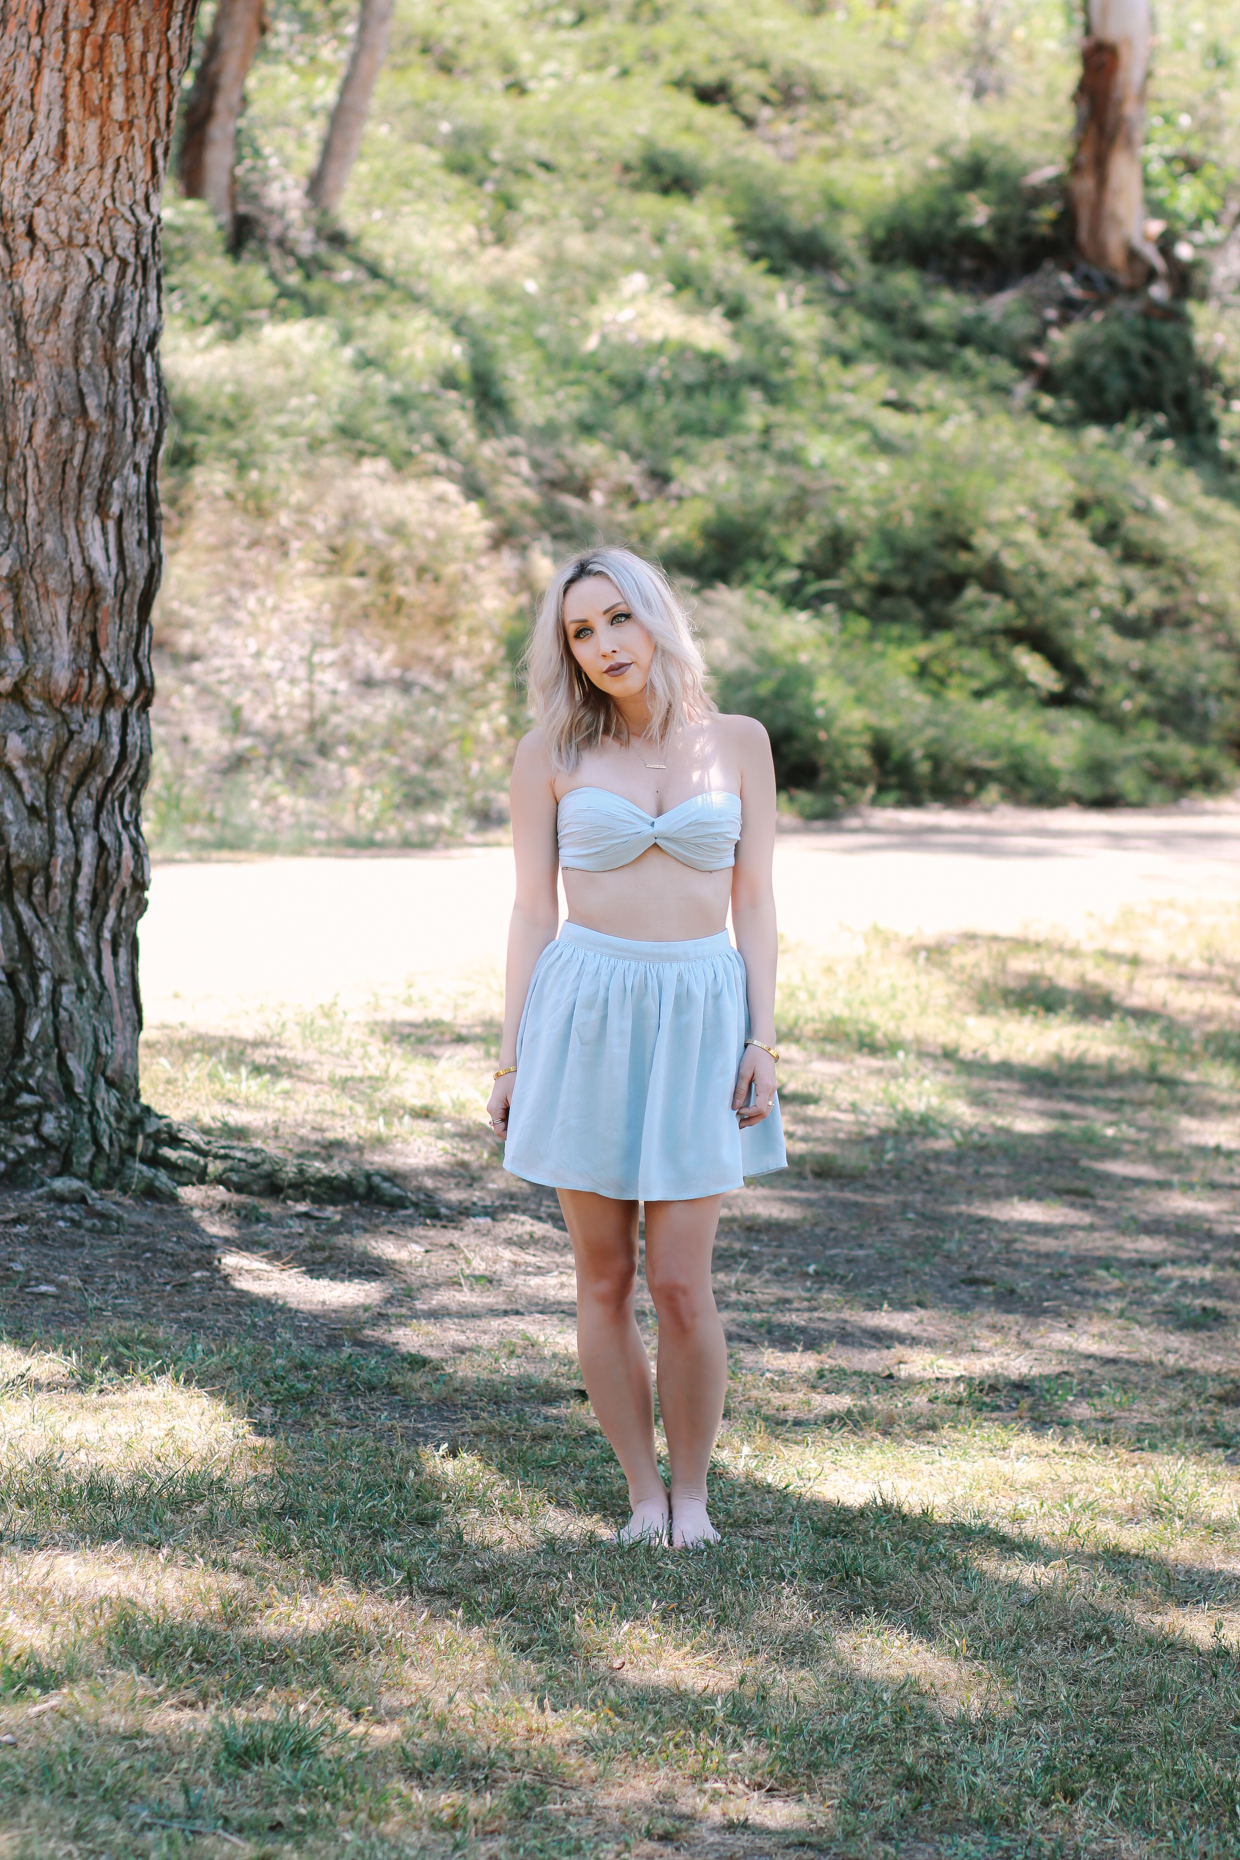 Blondie in the City | Baby Blue Bandeau and Skirt Set from @shoptobi | Summer / Festival Inspired Outfit